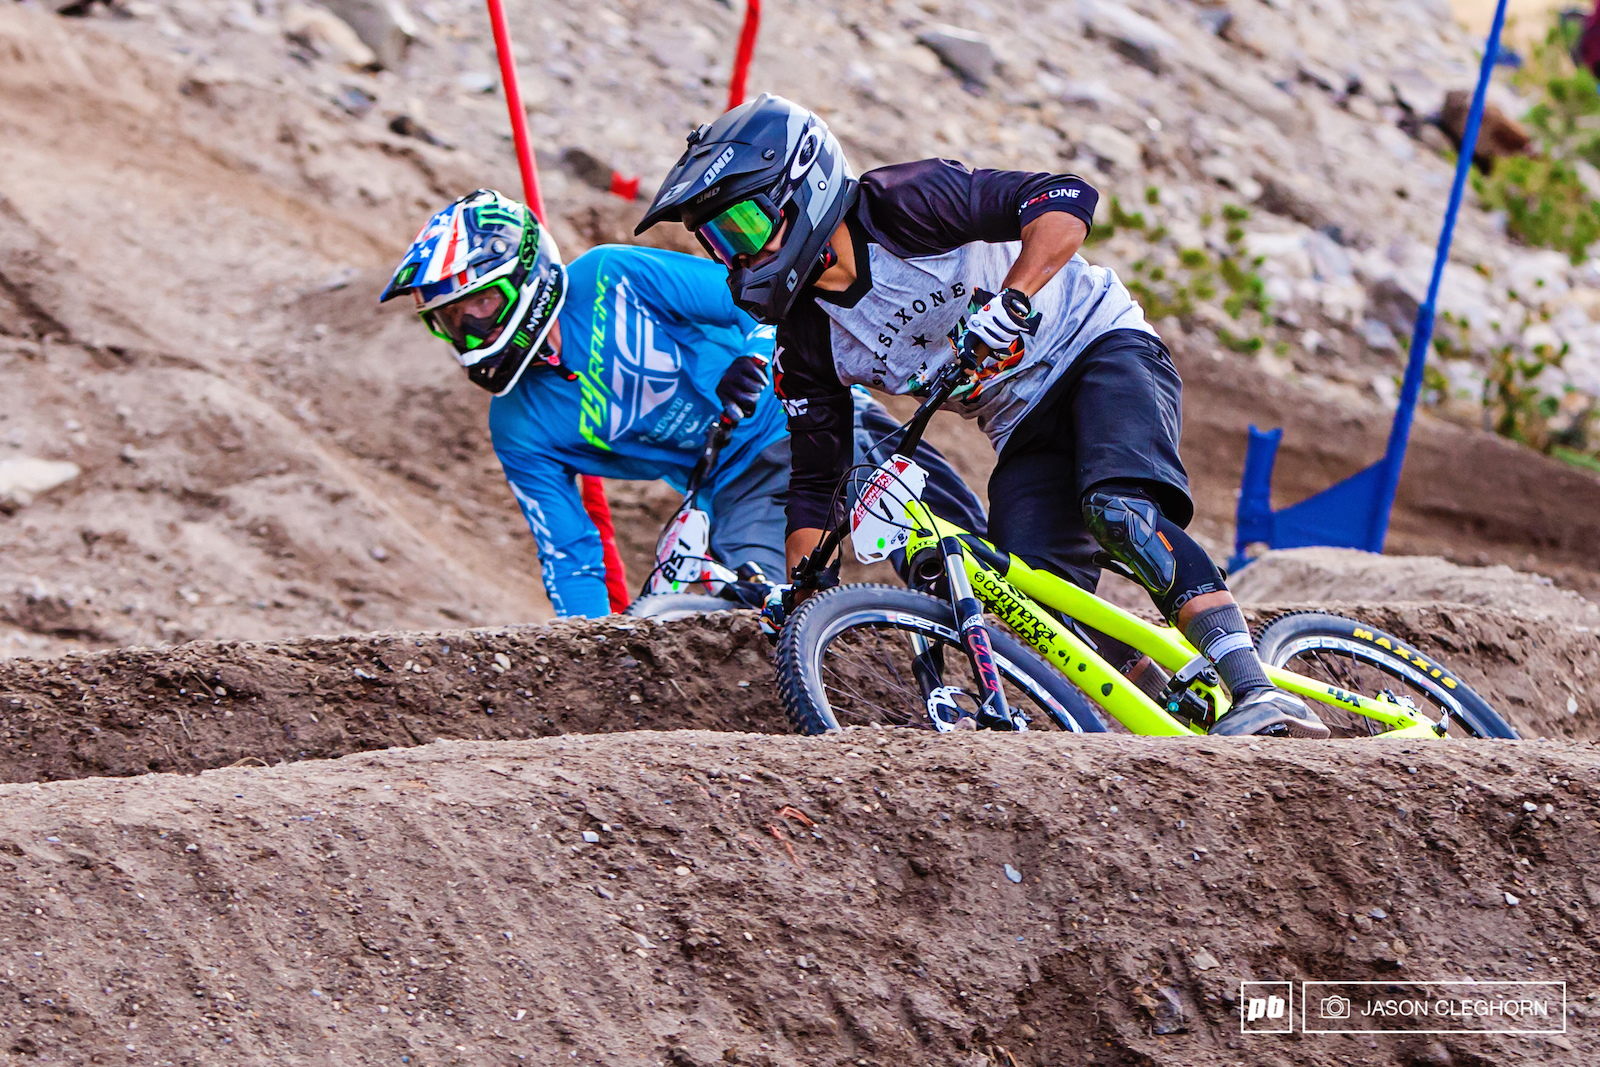 Austin Warren, on the right, would edge out Devin Kjaer for the win in Dual Slalom. This was Devin's first pro race!